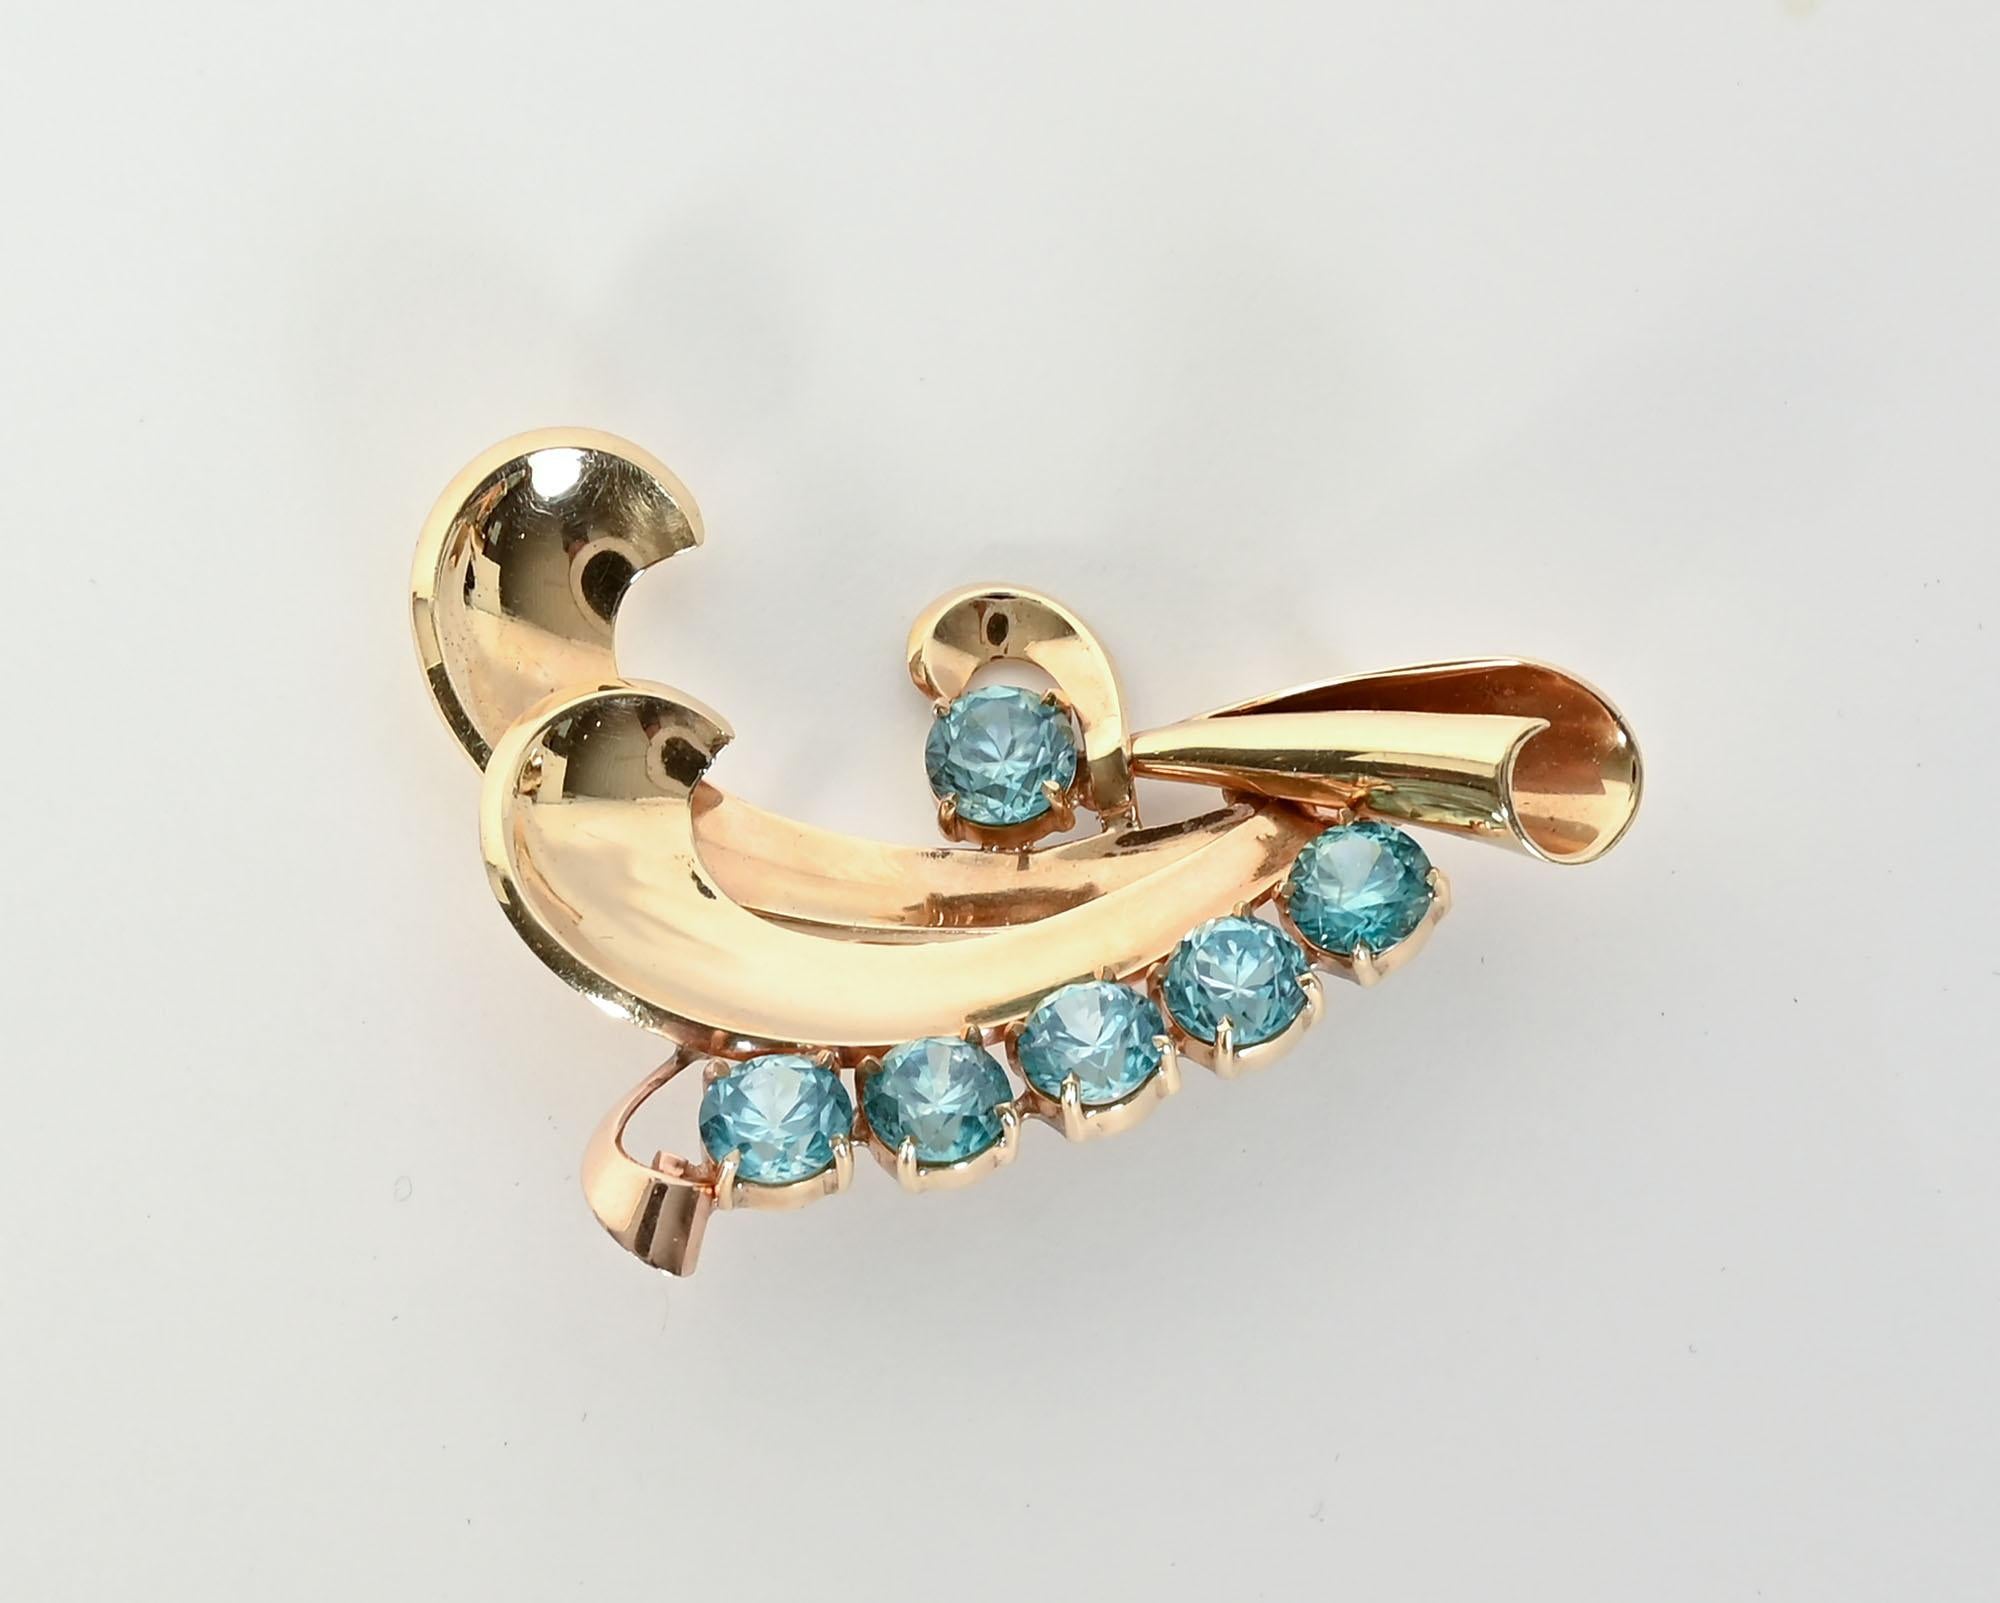 Graceful Retro brooch that can be worn in various directions. The scrolls can be up; down or on a diagonal. The 14 karat brooch is embellished with 6 blue topaz stones, each measuring 1/4 inch in diameter. The brooch has the curvilinear design